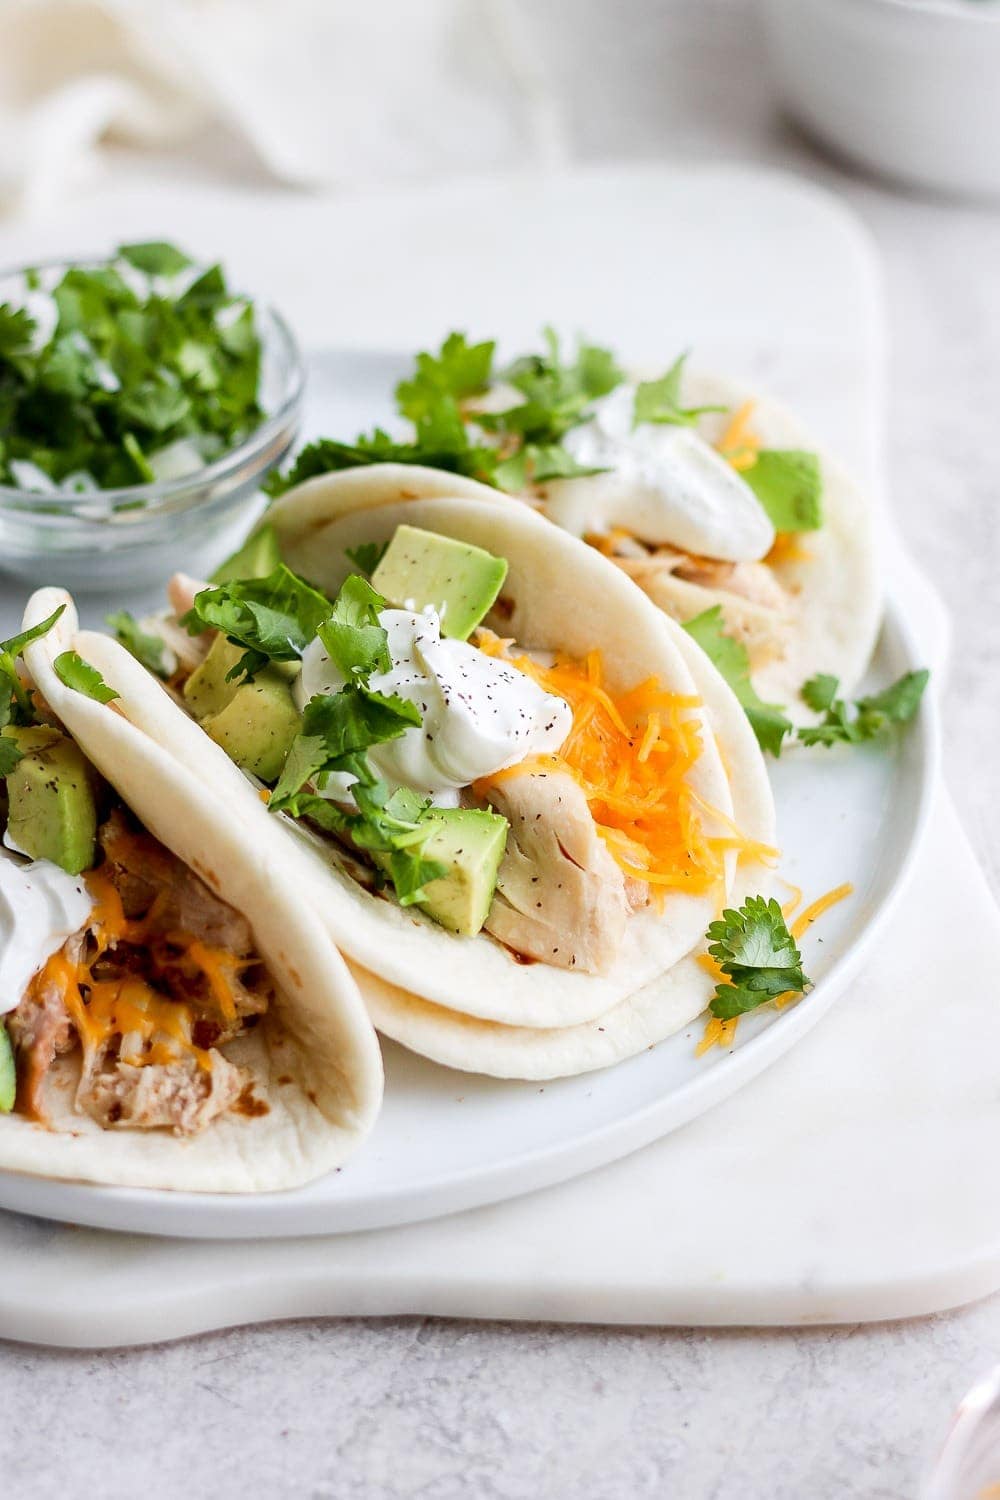 shredded chicken tacos on a plate